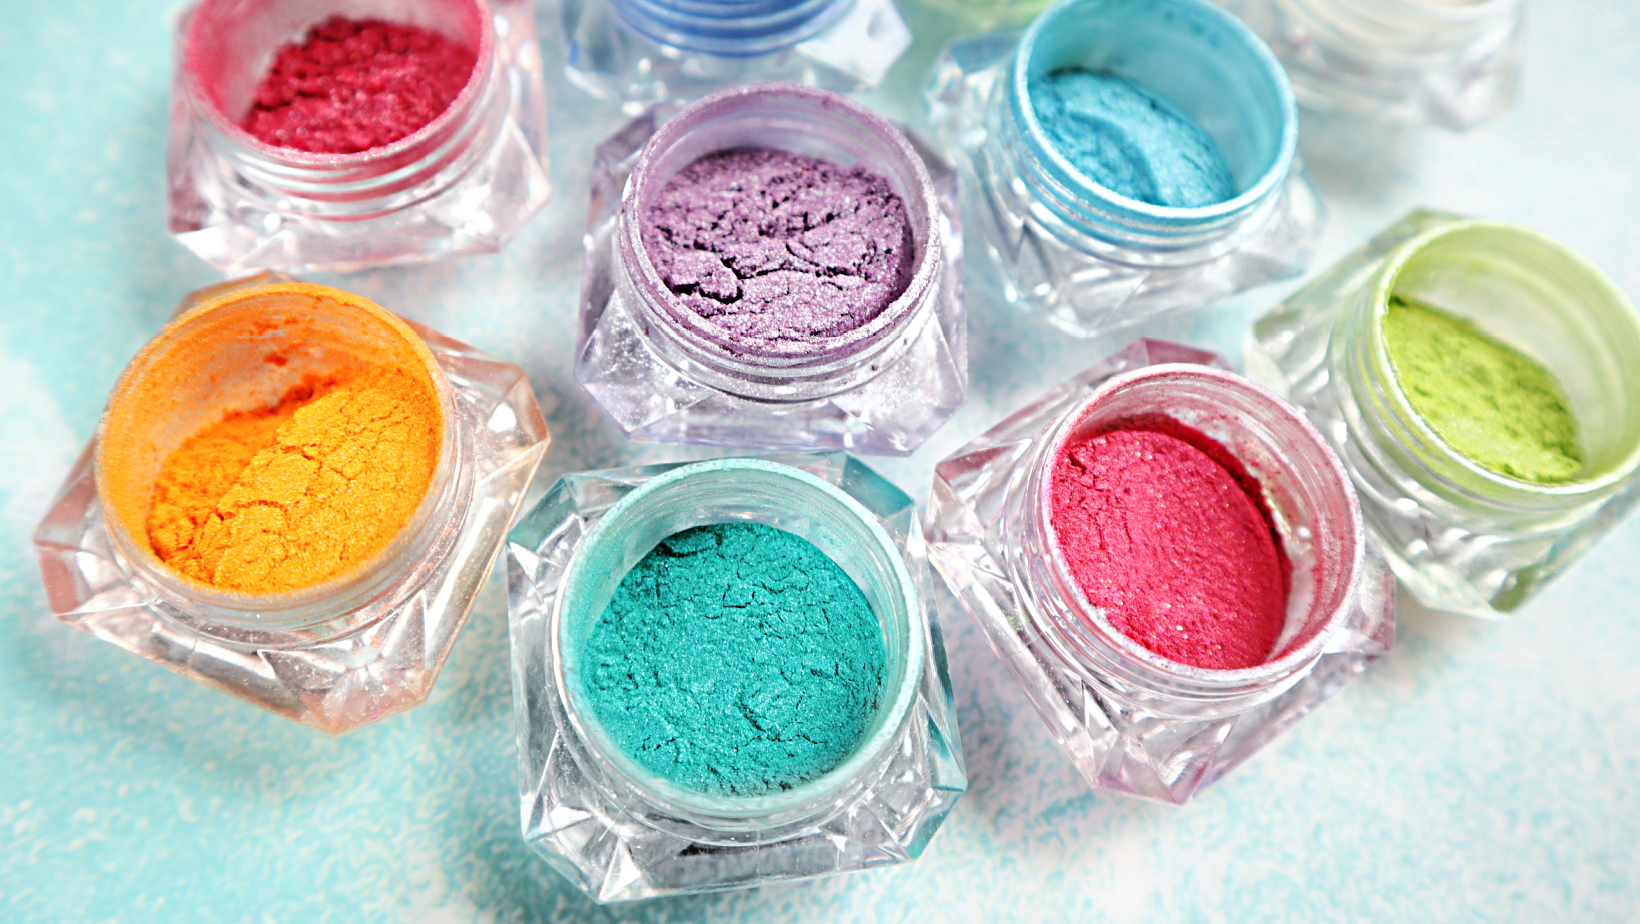 Is Mica Powder Safe for Lips? Here's What You Need to Know